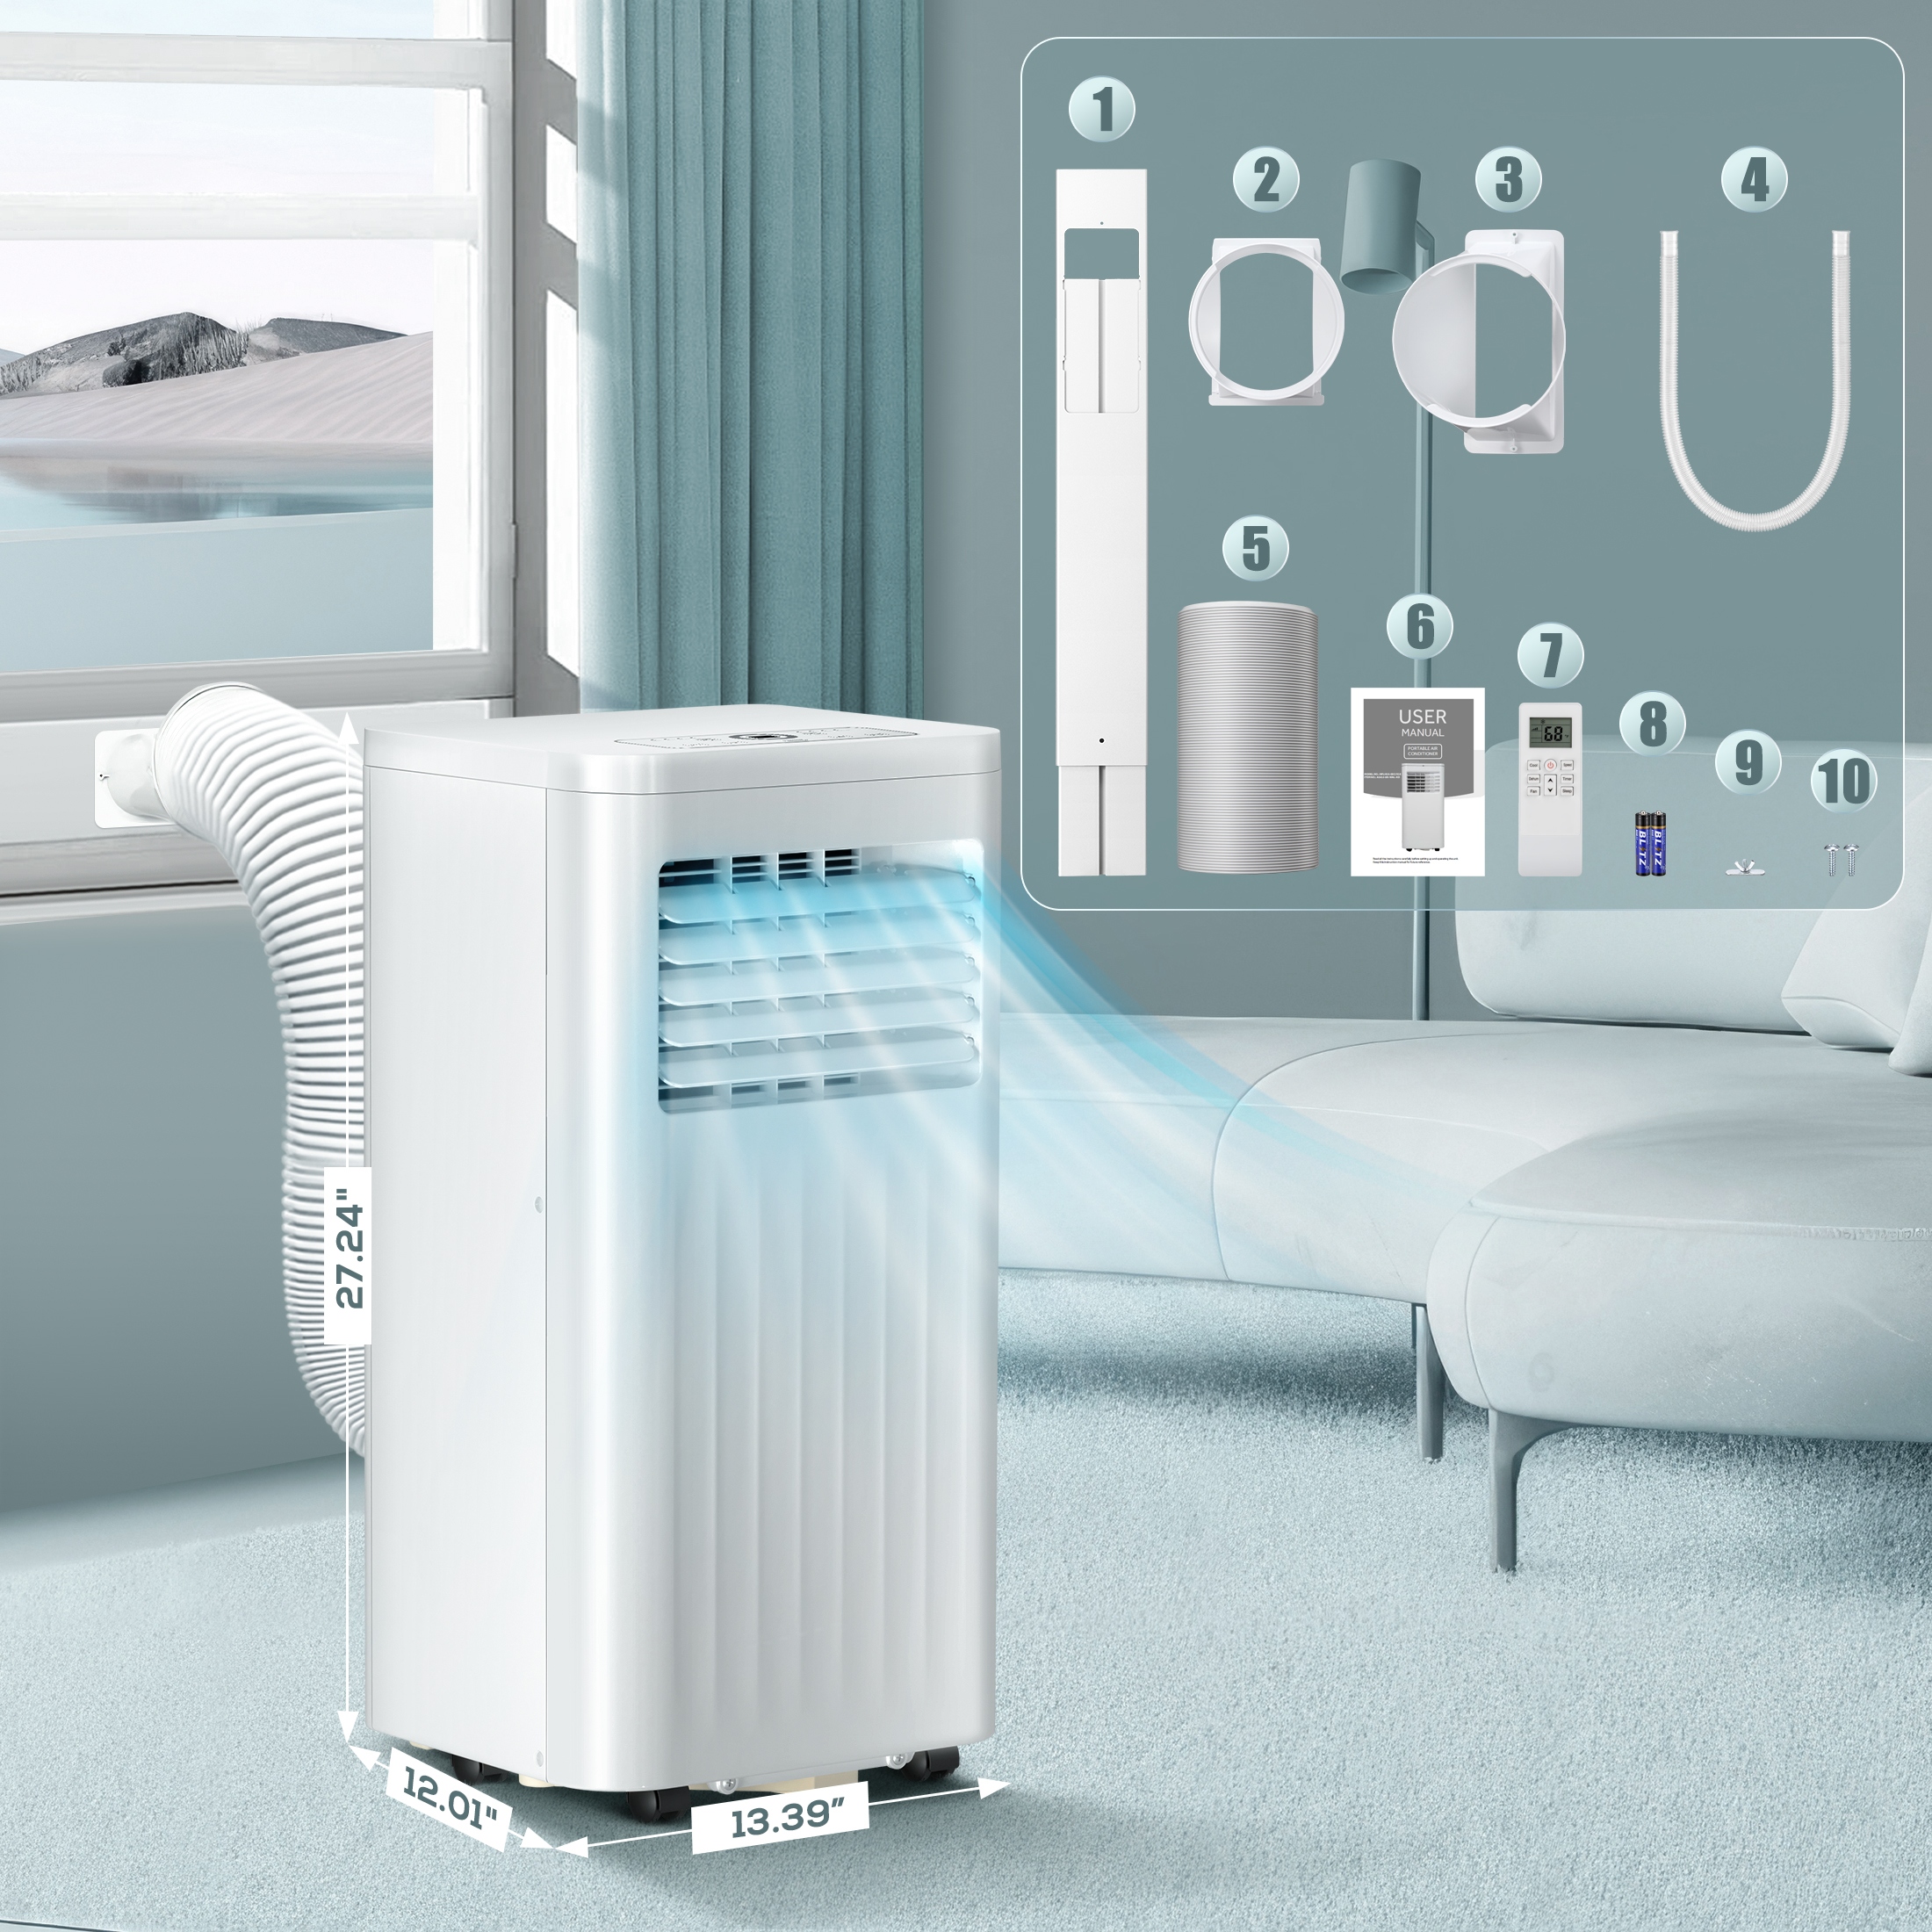 KISSAIR 6,000BTU( 10,000BTU ASHRAE) Portable Air Conditioner, Ultra Quiet 3-in-1 Cool/Dehumidifier/Fan, Air Conditioner with Remote Control for Home/Office-White - image 5 of 7